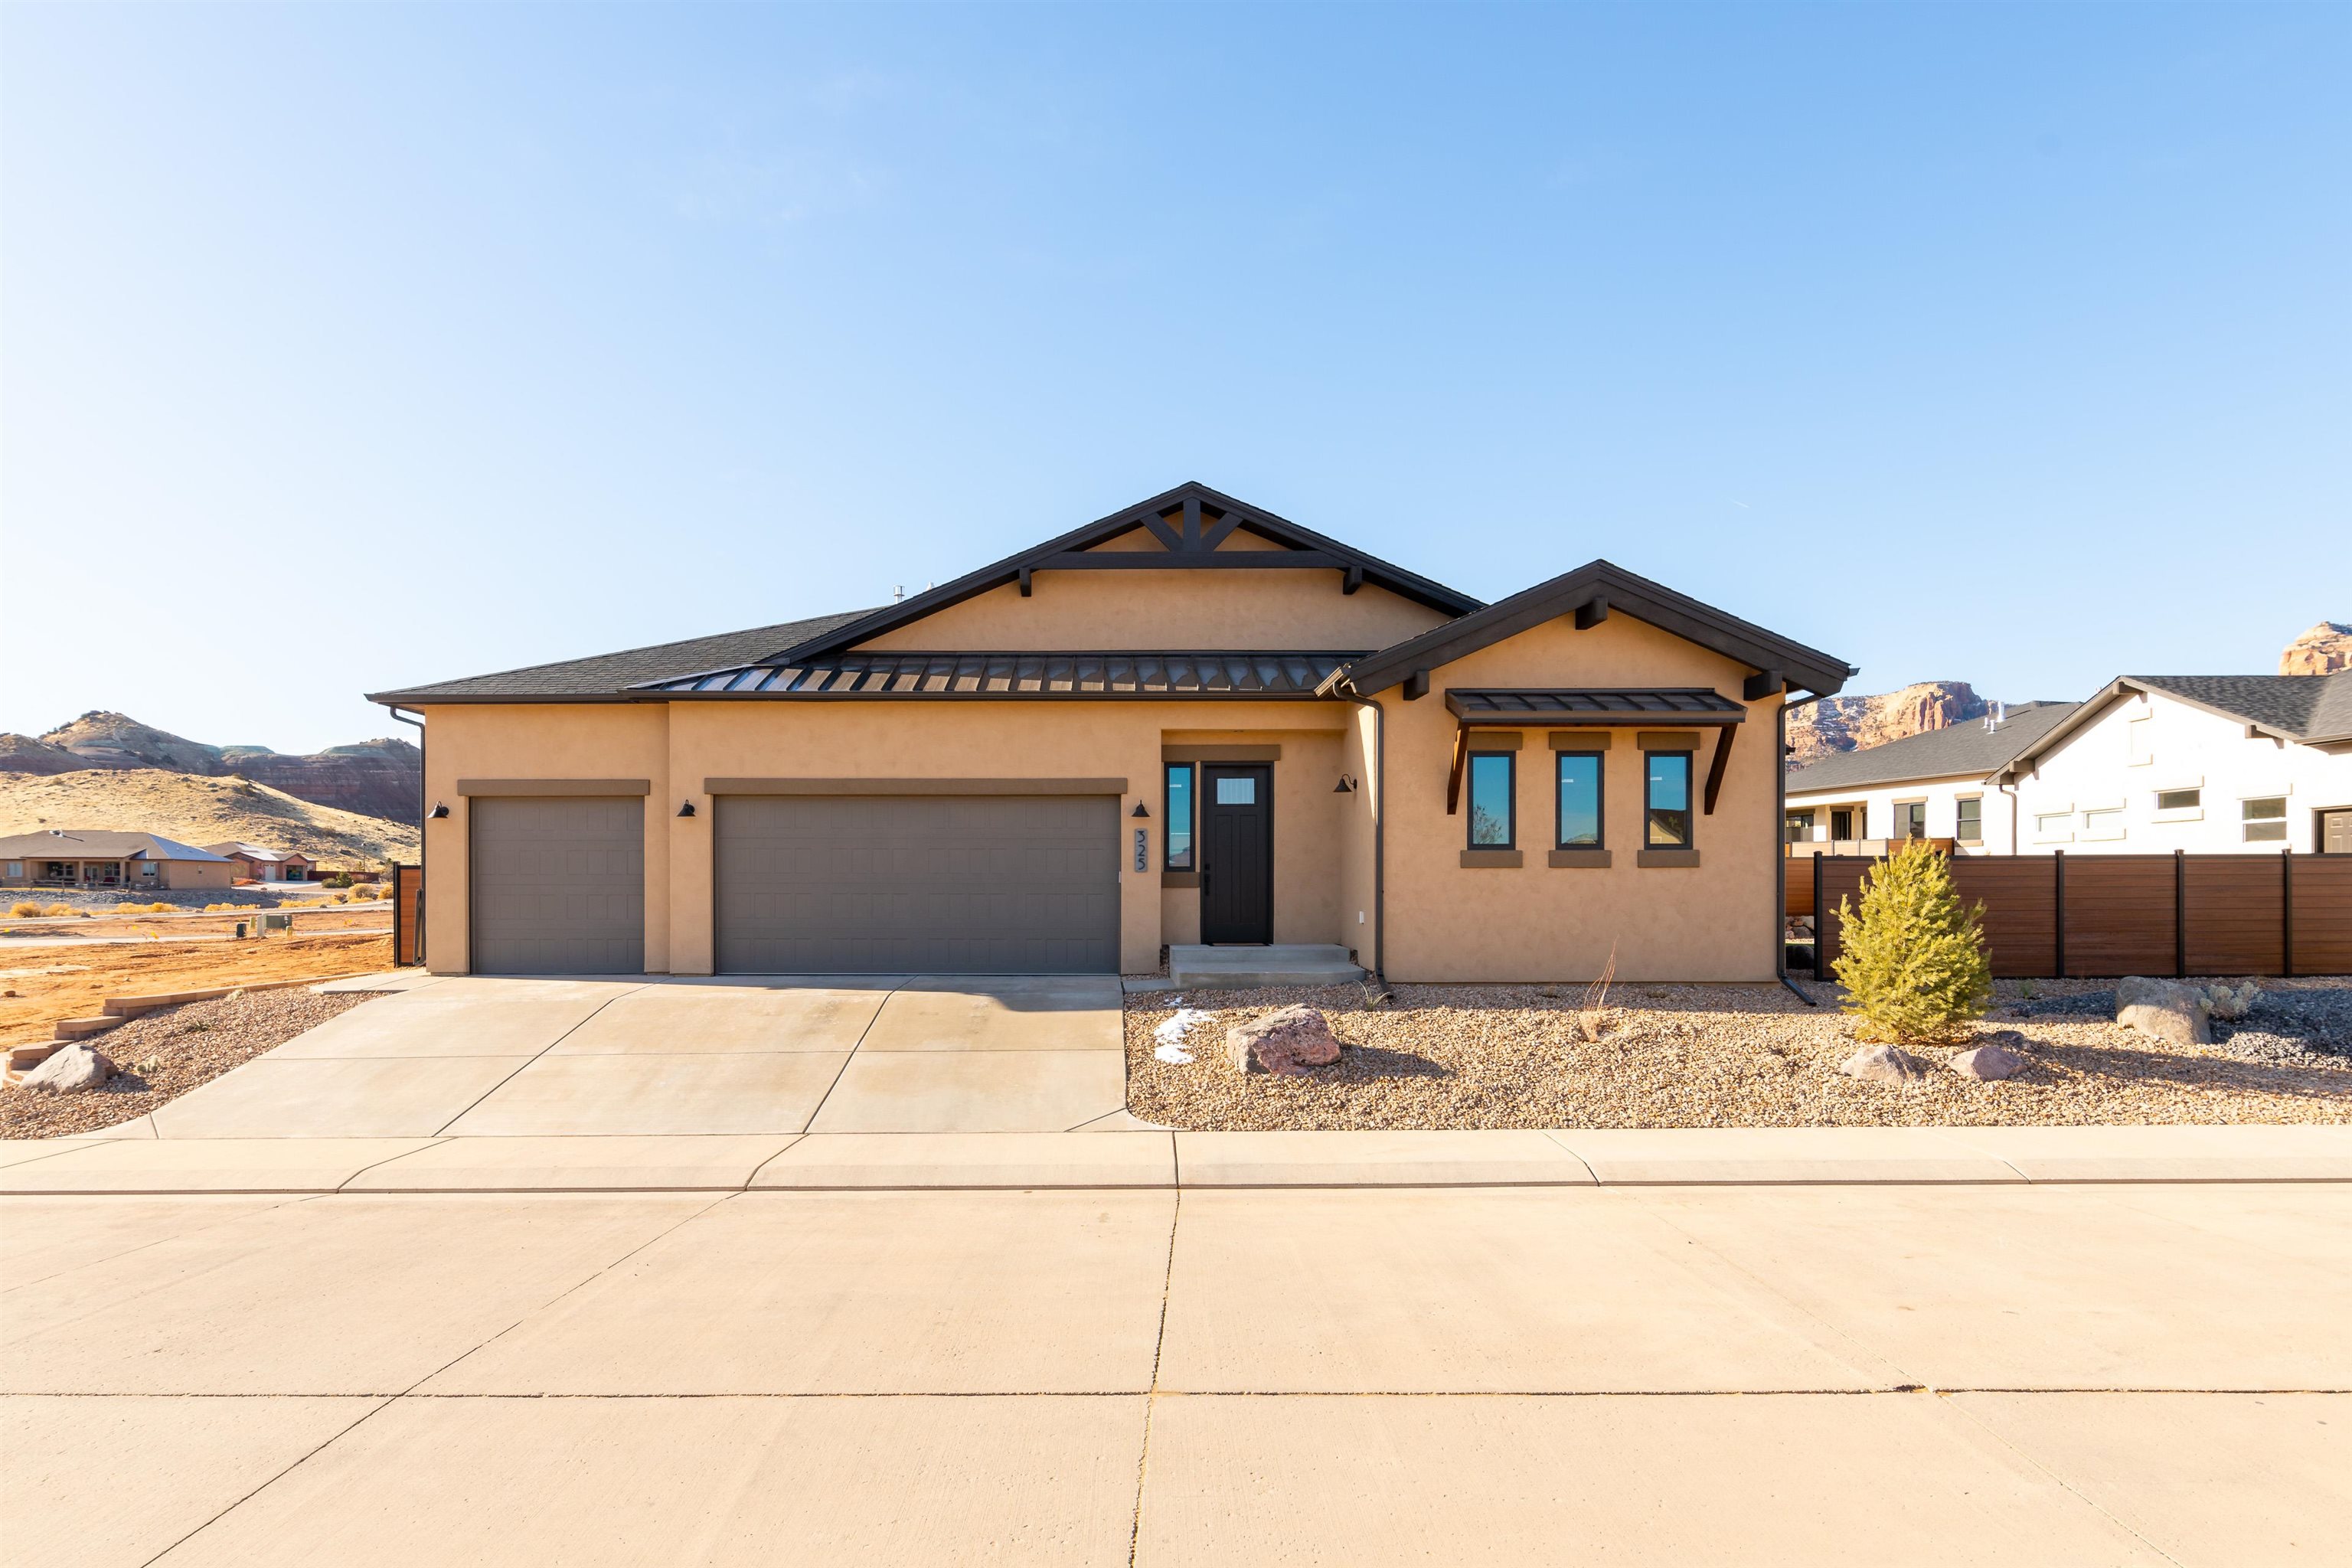 Another beauty brought to you by Conquest Construction.  Red Rocks Valley features stunning views and close proximity to the best of outdoor life in Western Colorado, plus it's a quick 5 minute drive to downtown GJ.  Inside you'll find vaulted ceilings, rustic wood beams, gorgeous flooring and finishes throughout with Andersen Windows installed to capture the views out every window. High desert landscaping and custom fencing is included! This home is currently under construction.  Book your private showing today!